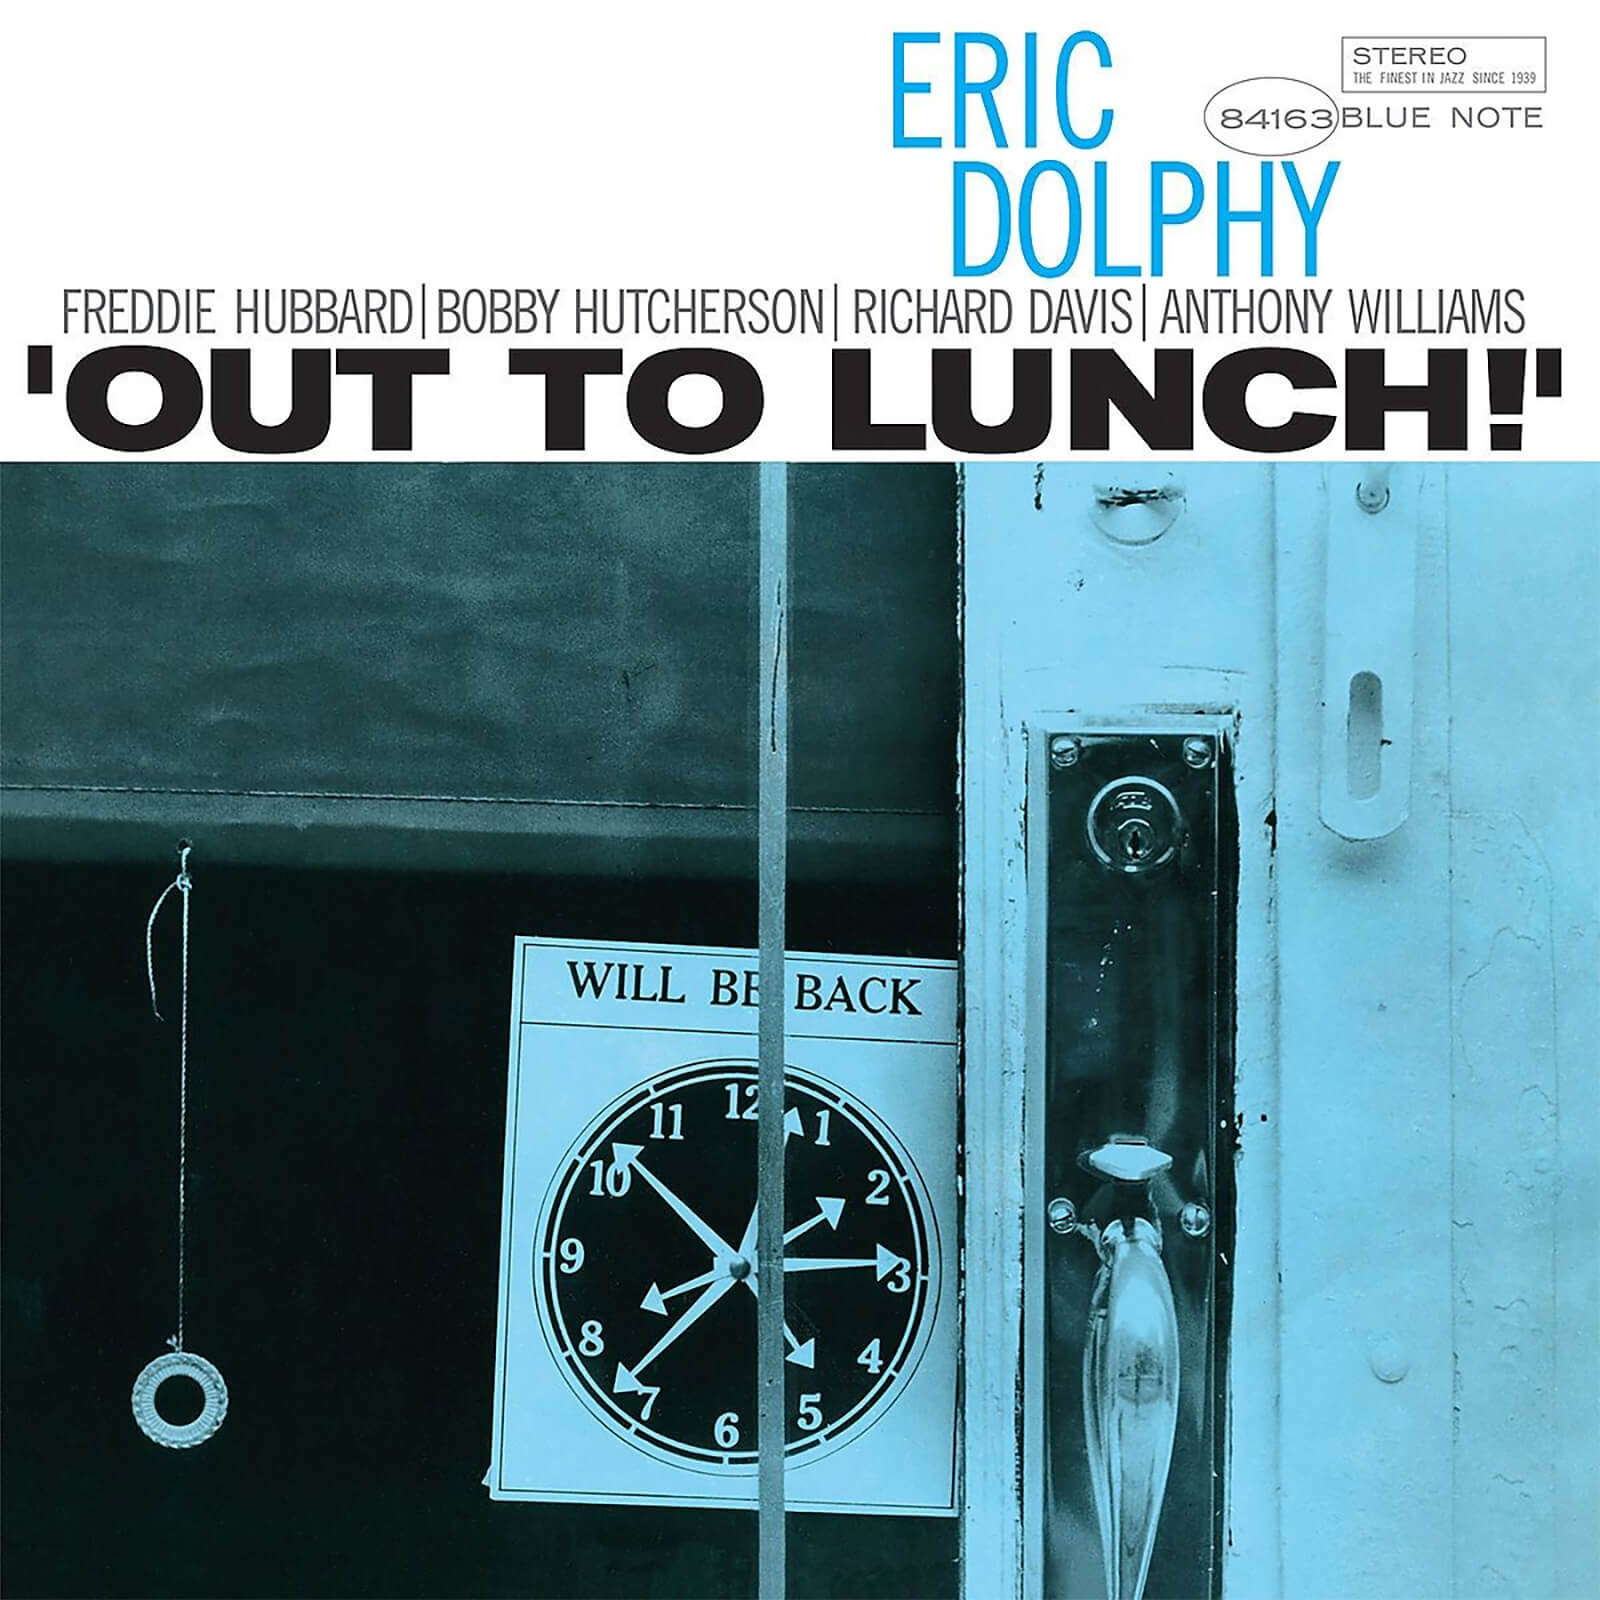 Eric Dolphy - Out To Lunch Vinyl